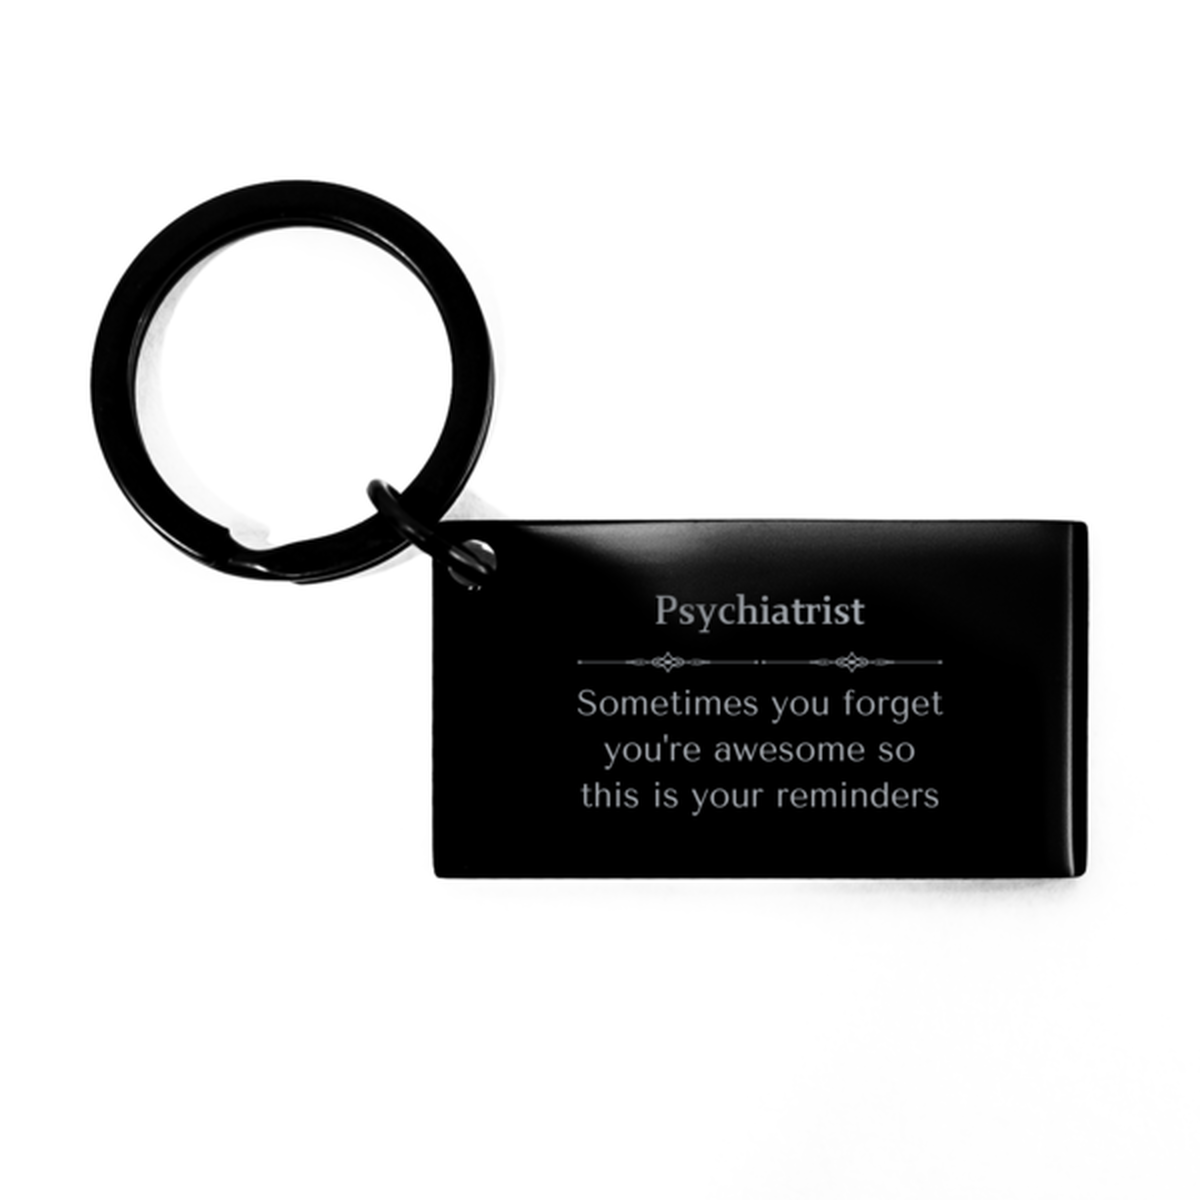 Sentimental Psychiatrist Keychain, Sonographer Sometimes you forget you're awesome so this is your reminders, Graduation Christmas Birthday Gifts for Psychiatrist, Men, Women, Coworkers